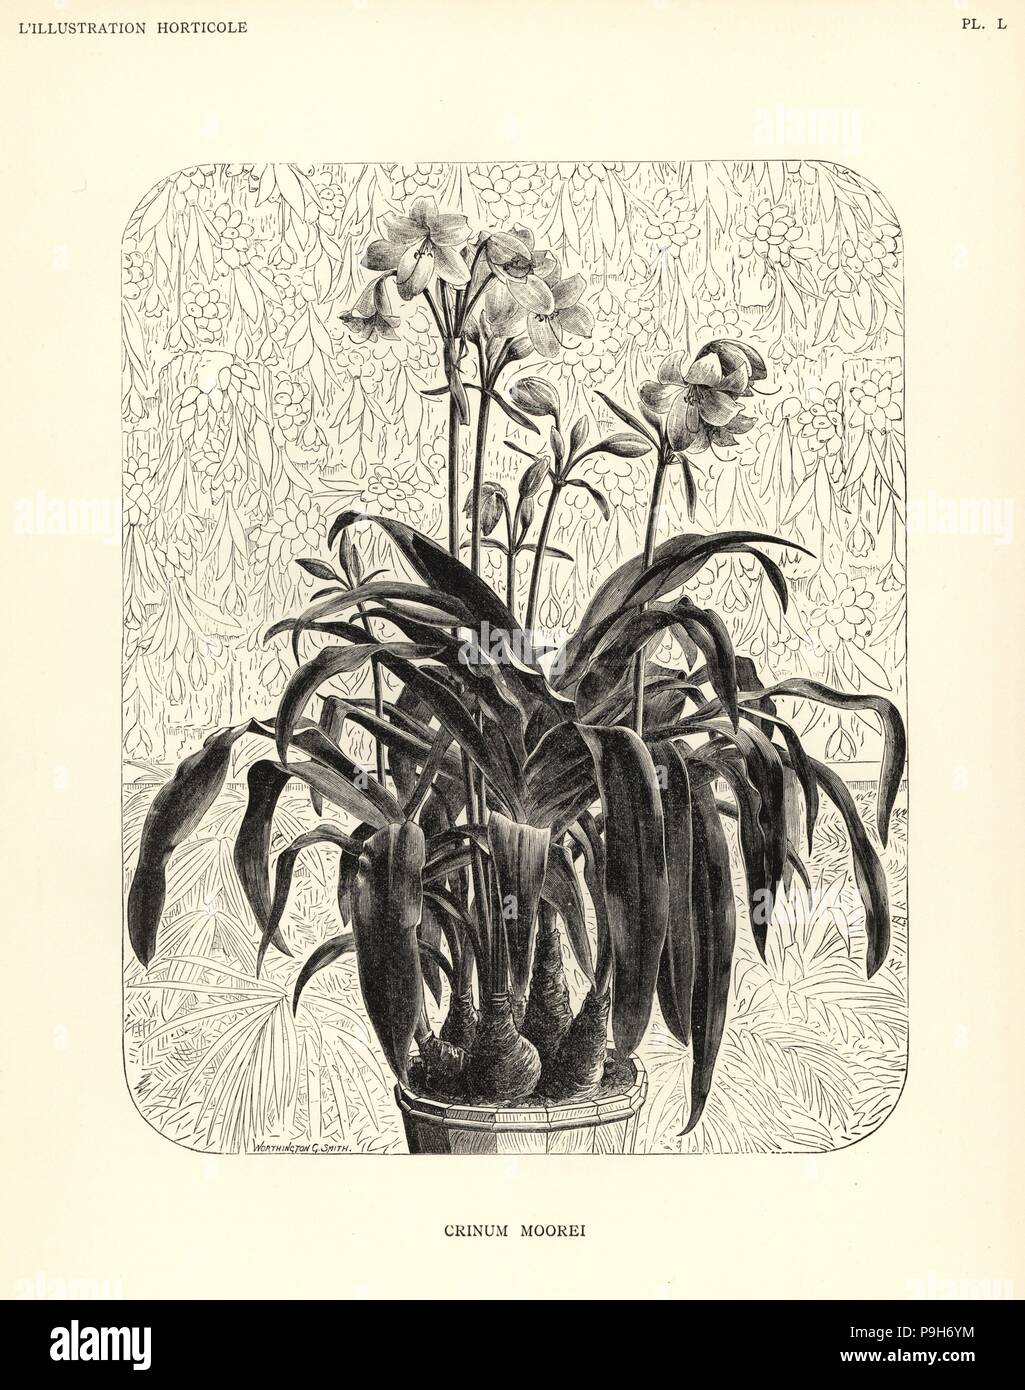 Moore's crinum, Crinum moorei. Woodcut after an illustration by Worthington G. Smith from Jean Linden's l'Illustration Horticole, Brussels, 1888. Stock Photo